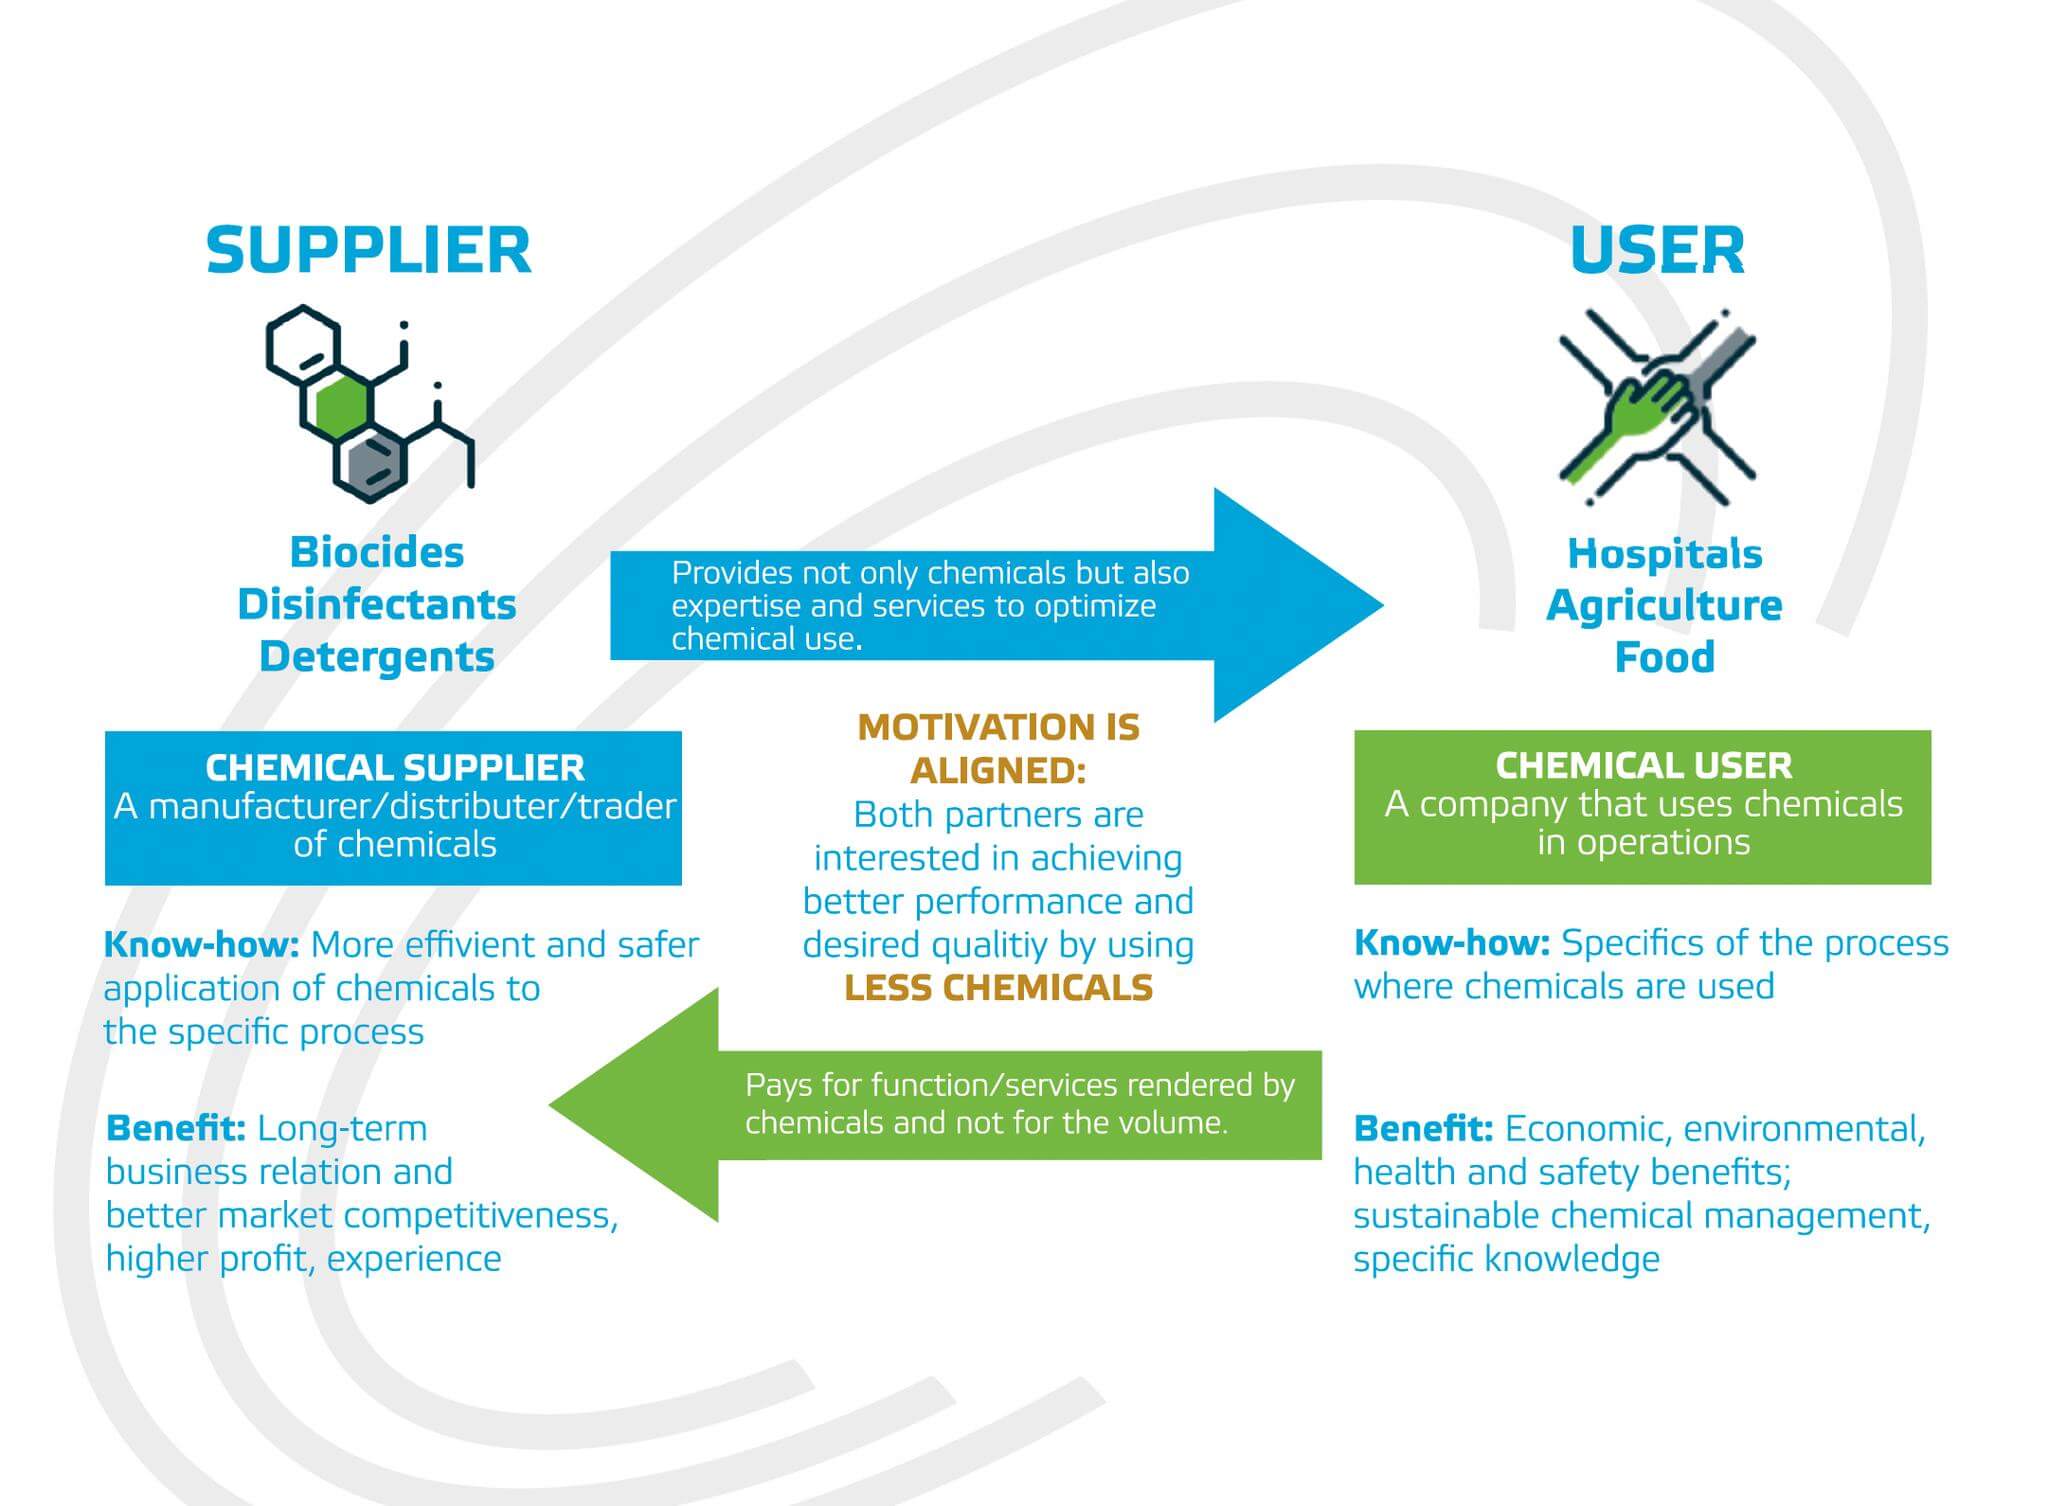 Graphic explaining the relationship between the user and supplier.